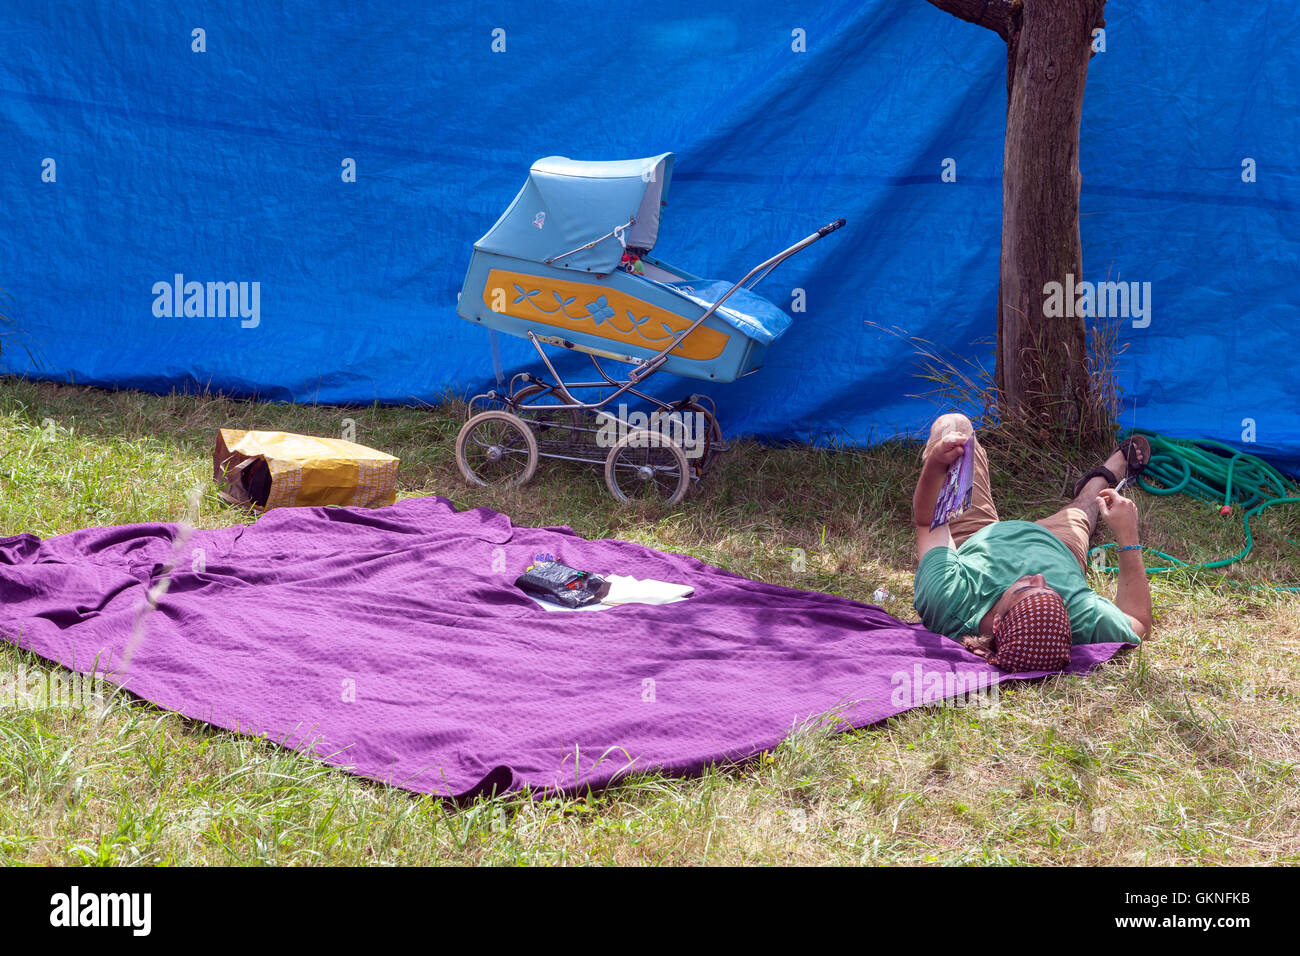 Babysitting, Man lying on a blanket and a stroller at blue wall in shadow, a summer idyll, Czech Republic family trip Stock Photo